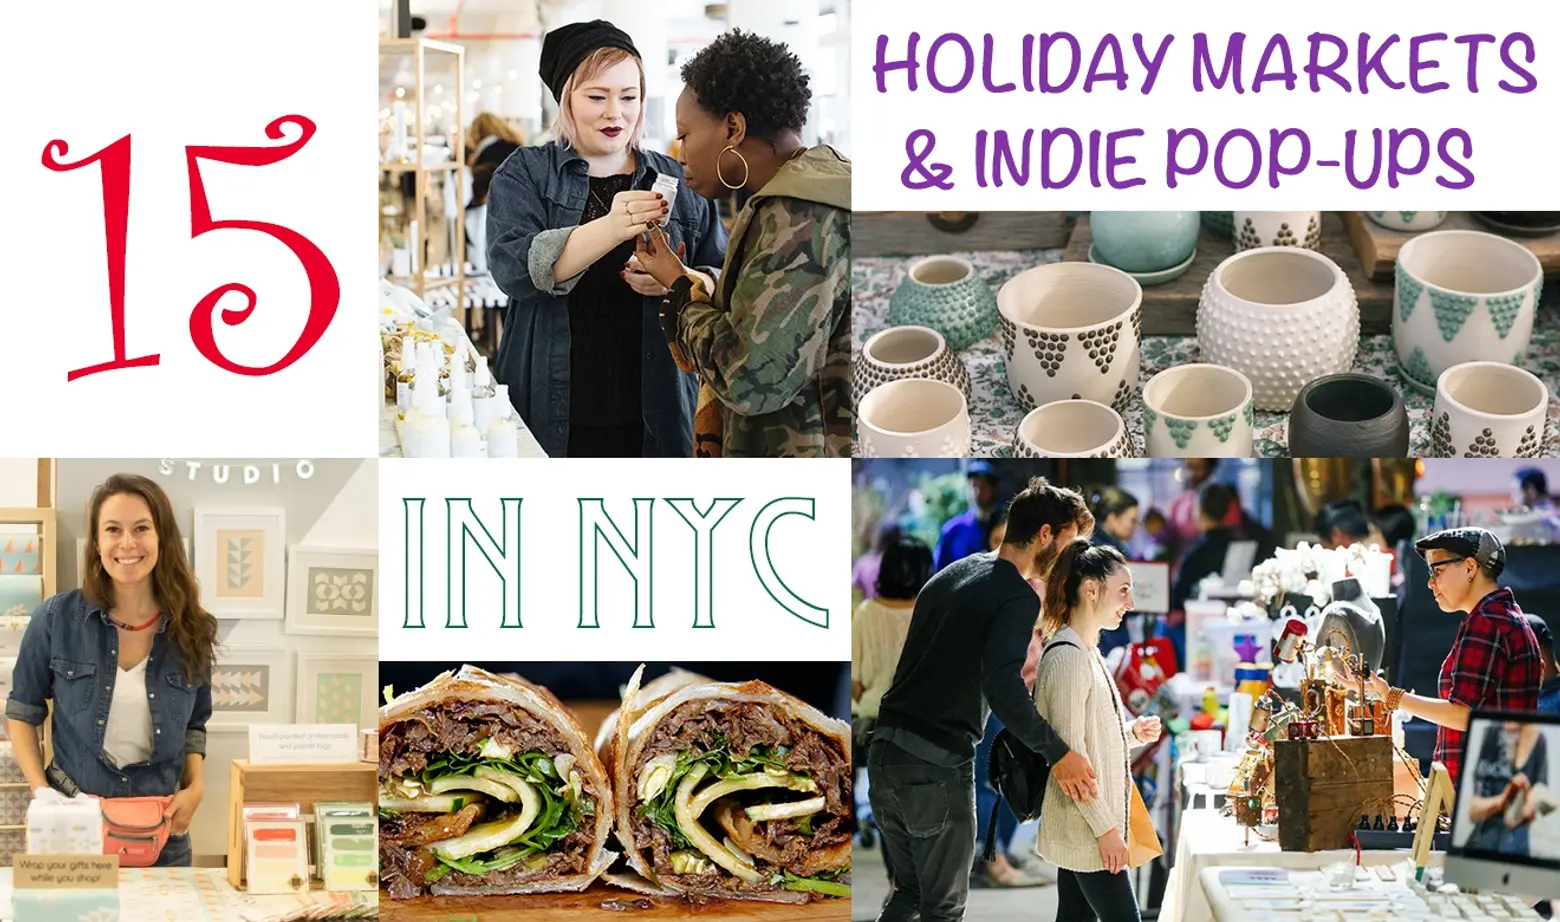 15 alternative holiday markets and indie pop-up shops in NYC